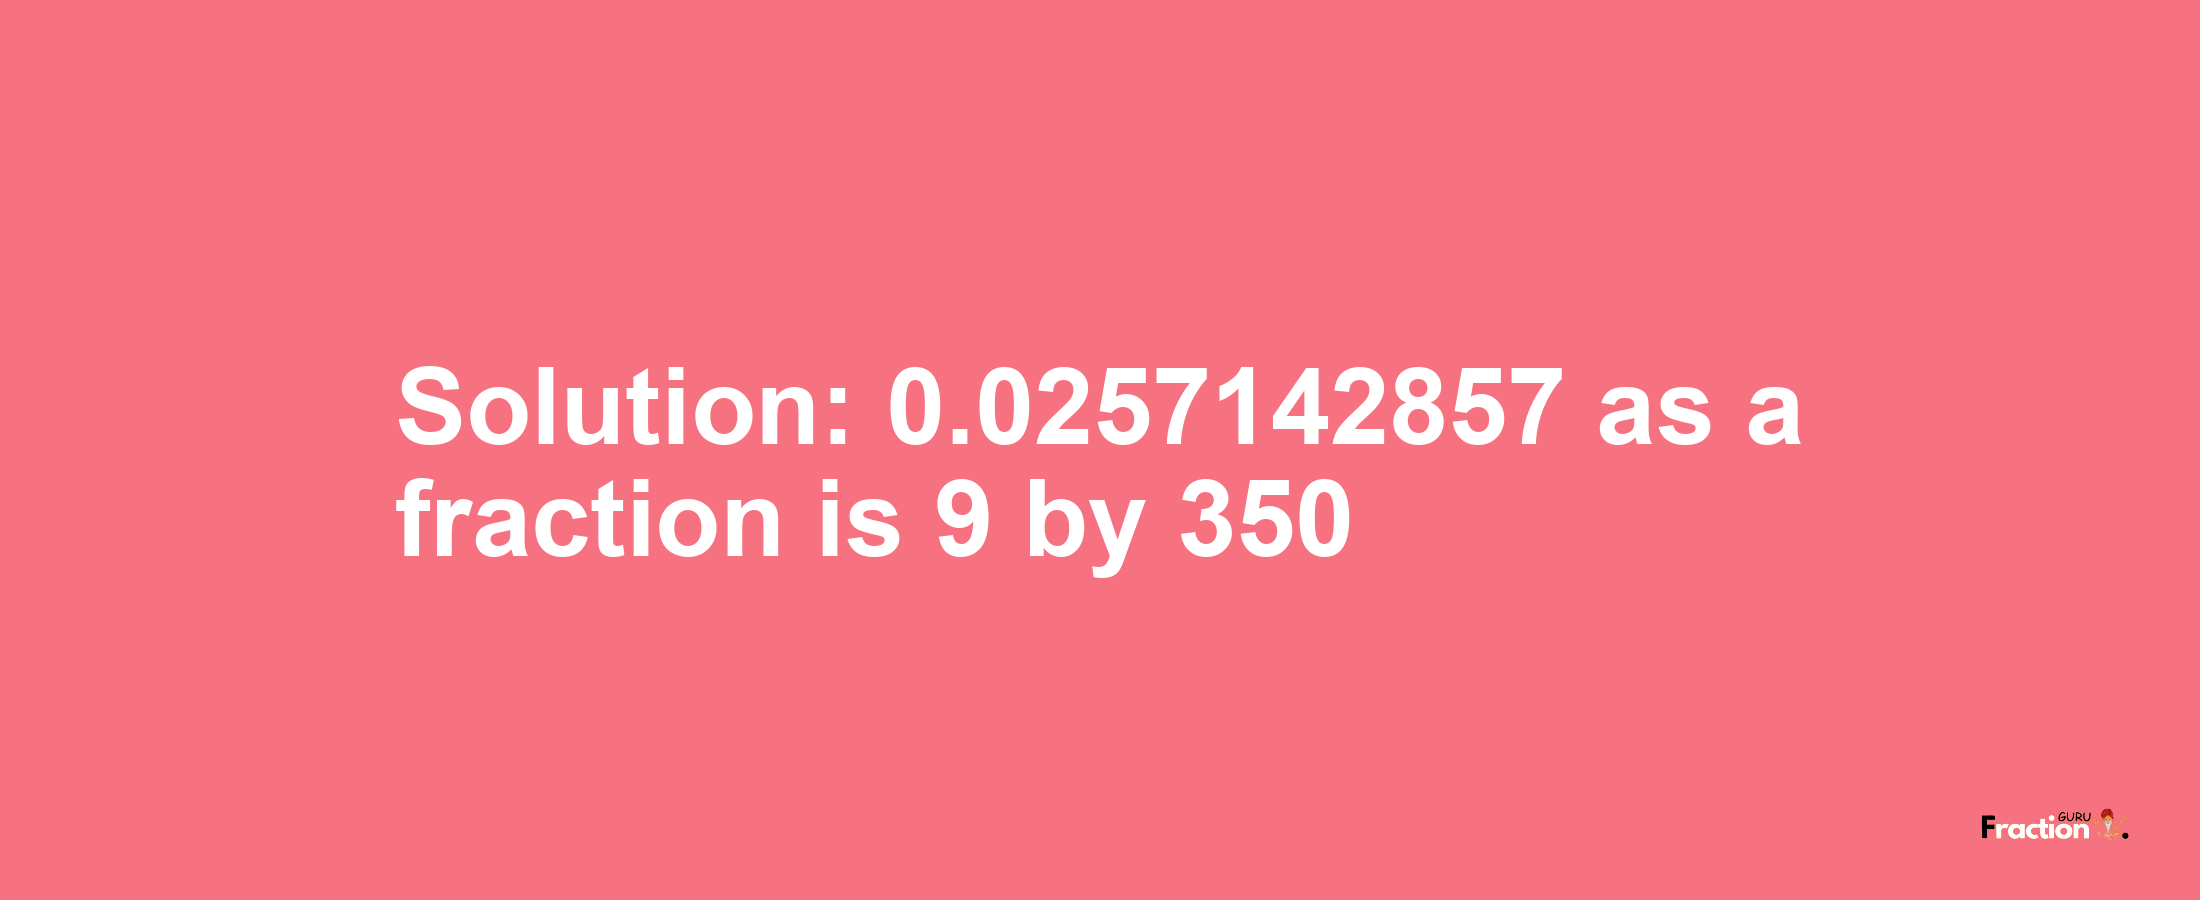 Solution:0.0257142857 as a fraction is 9/350